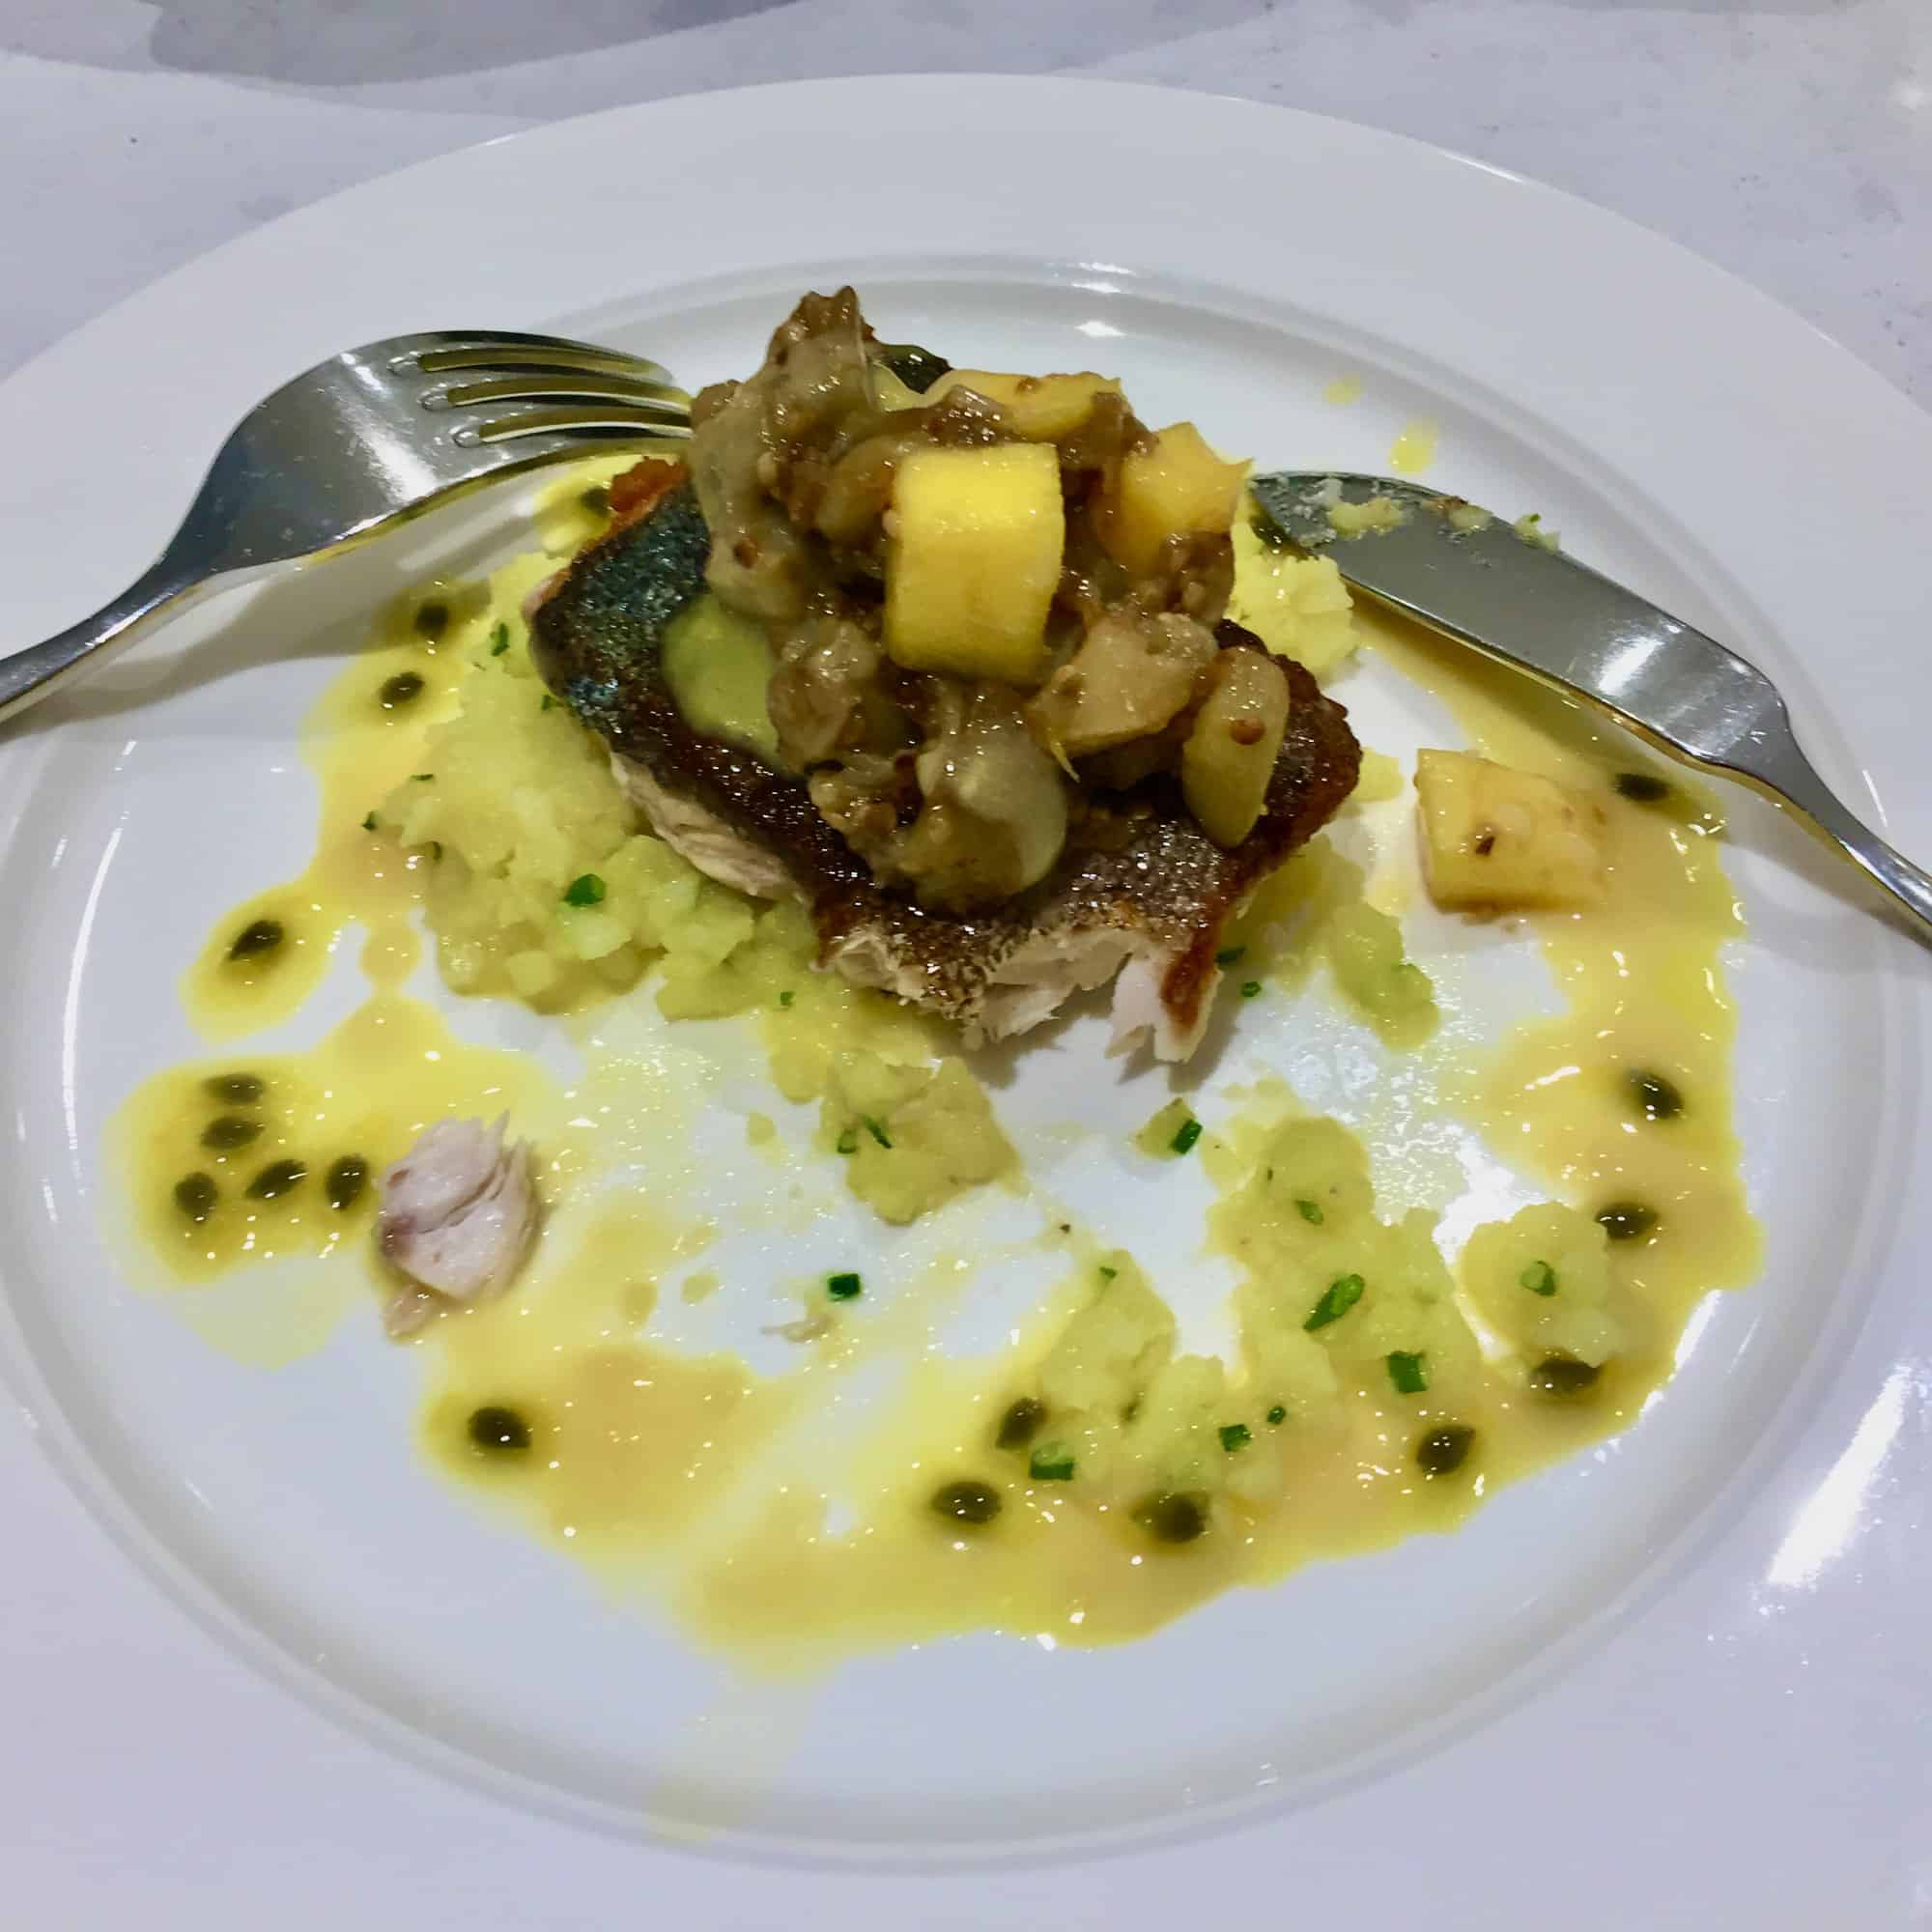 Come aboard and sample the Cuisine on the World’s # 1 Cruise Line. My latest article for The Daily Meal is here! Complete with a recipe for Seared Mahi Mahi from the Chef!